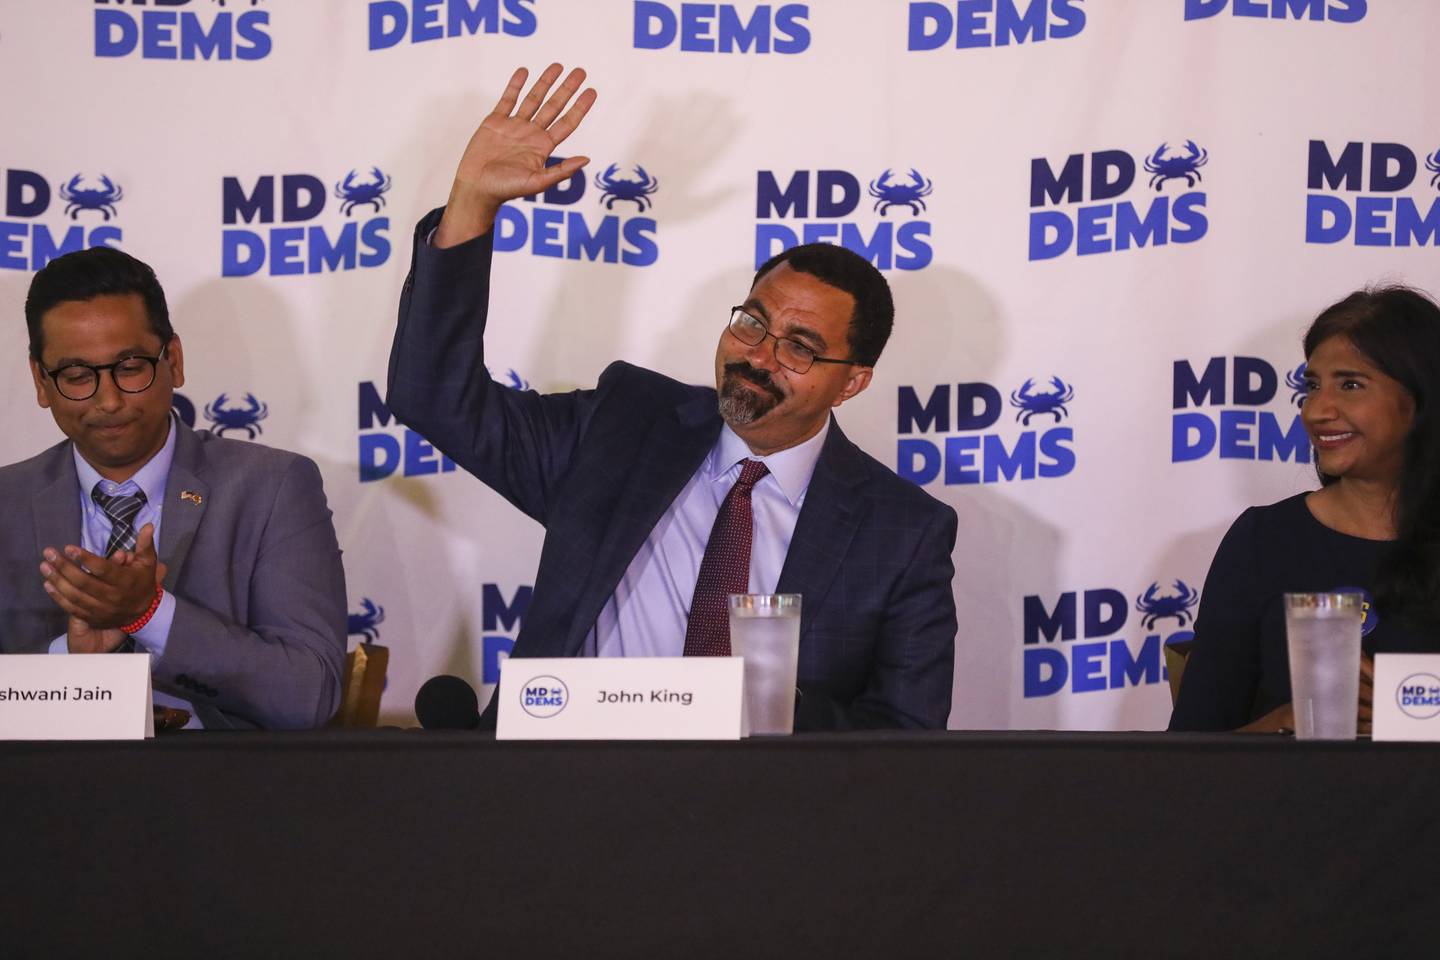 Gubernatorial candidate John King, center, waves to the audience during a forum on healthcare issues sponsored by the Maryland Democratic Party at BC Brewery on May 31, 2022. On the left is gubernatorial candidate Ashwani Jain and to the right is Aruna Miller, the lieutenant governor running mate of Wes Moore, who could not attend because he said he had coronavirus. (Kaitlin Newman for The Baltimore Banner)